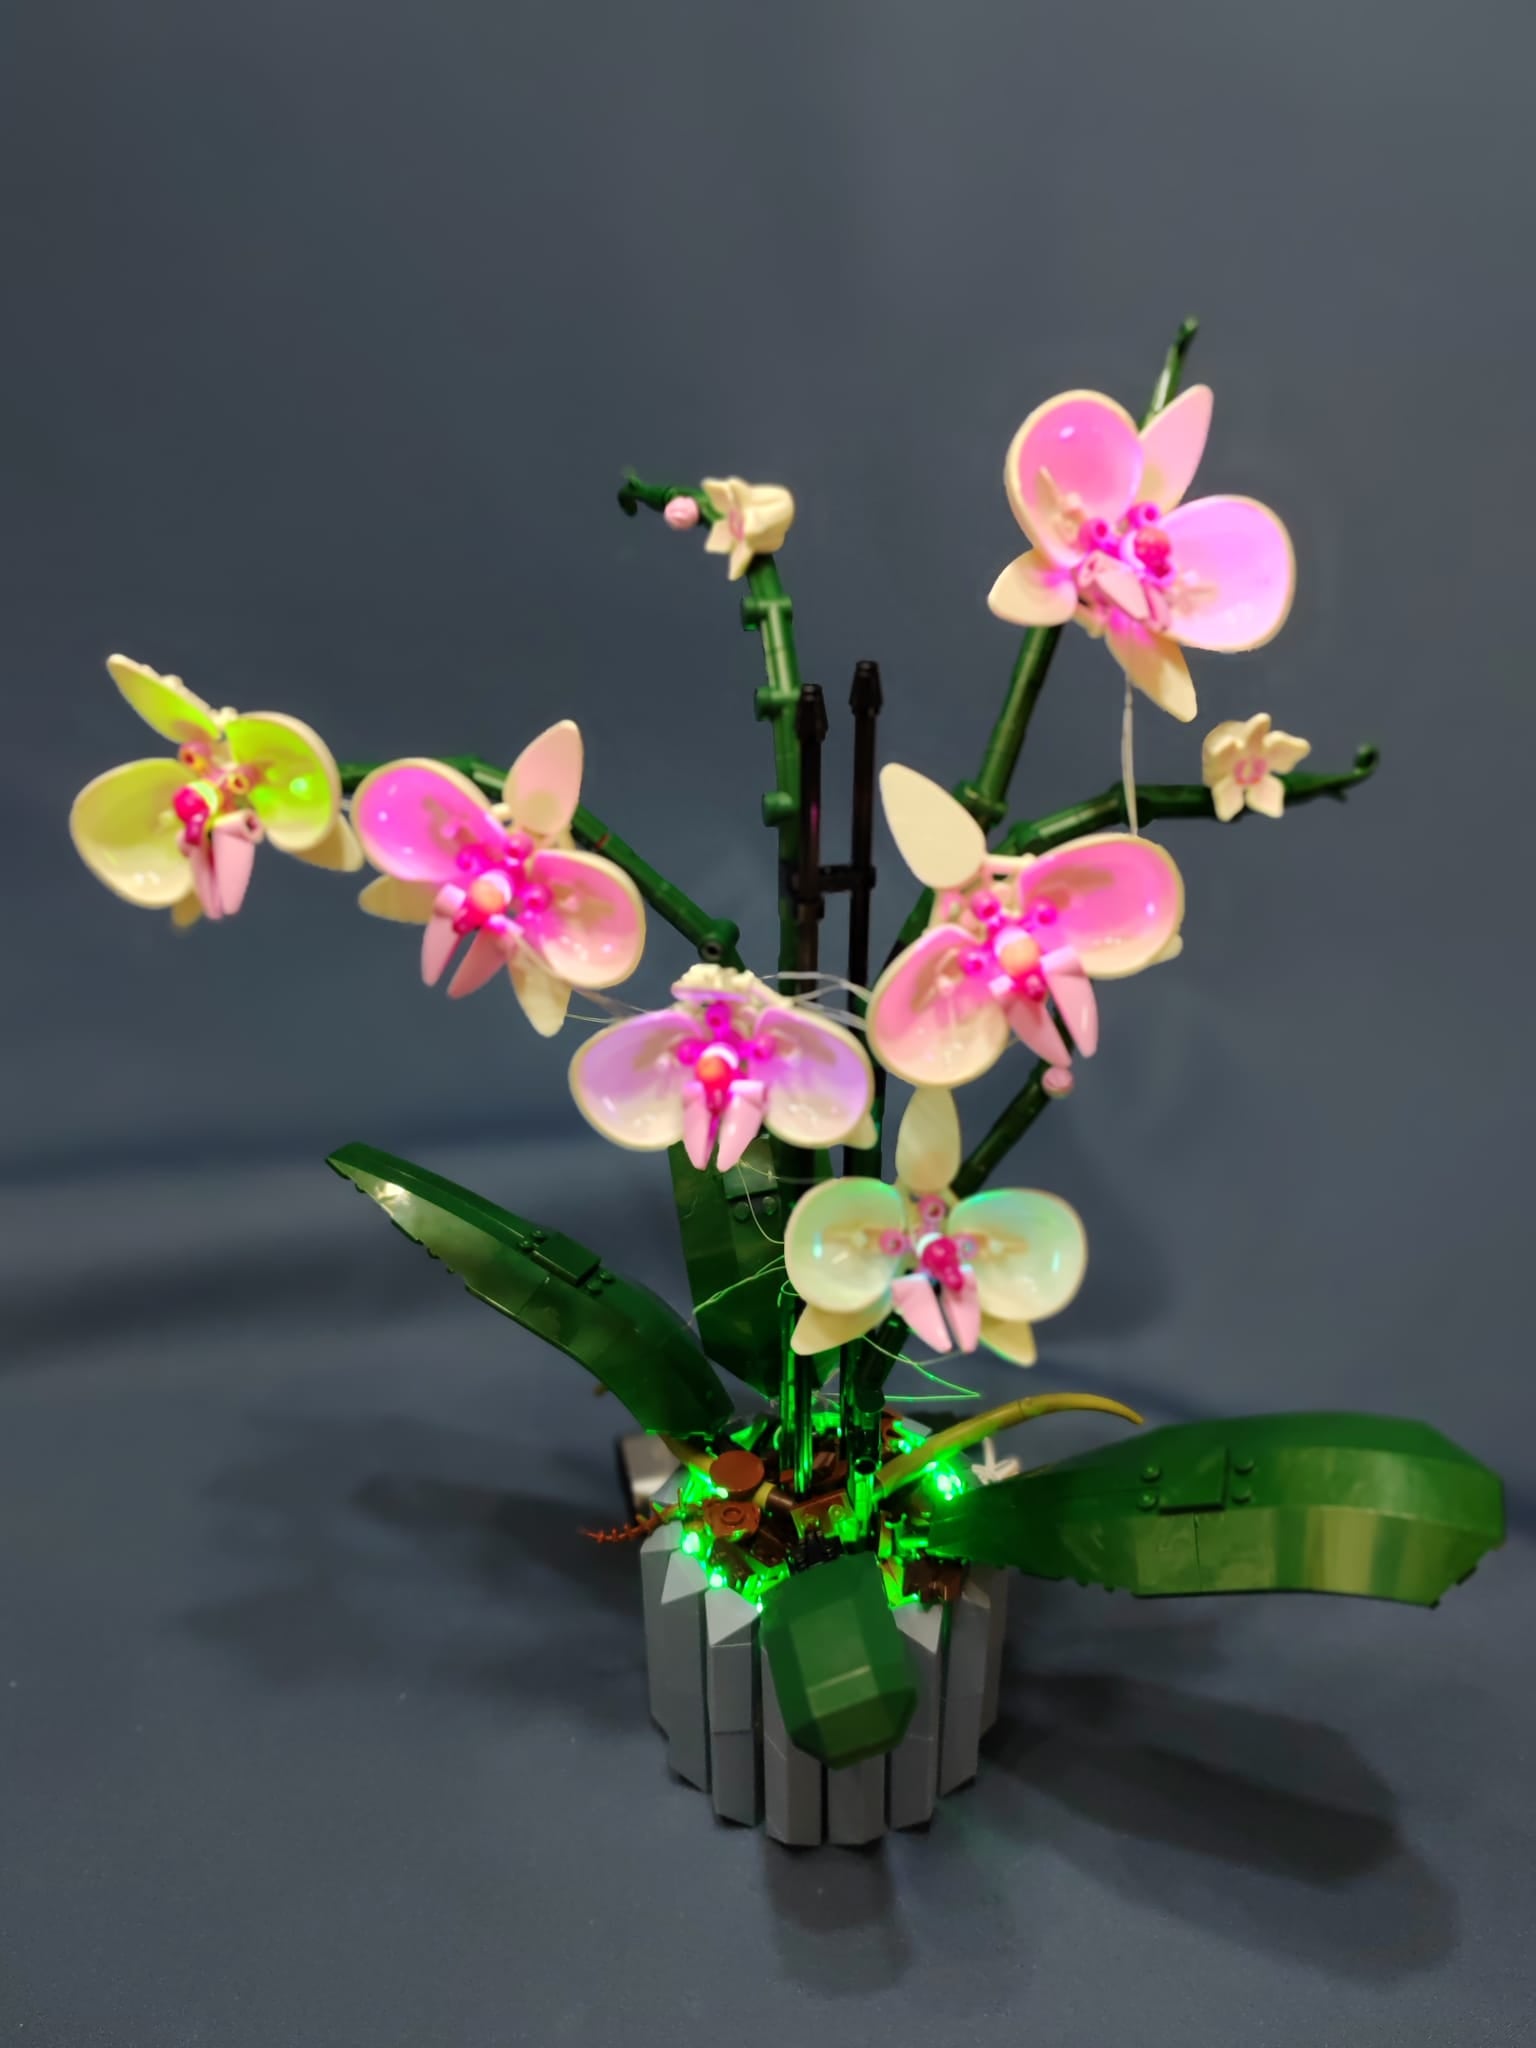 Lego - Creator Expert - 10311 - Botanical Collection - Orchid